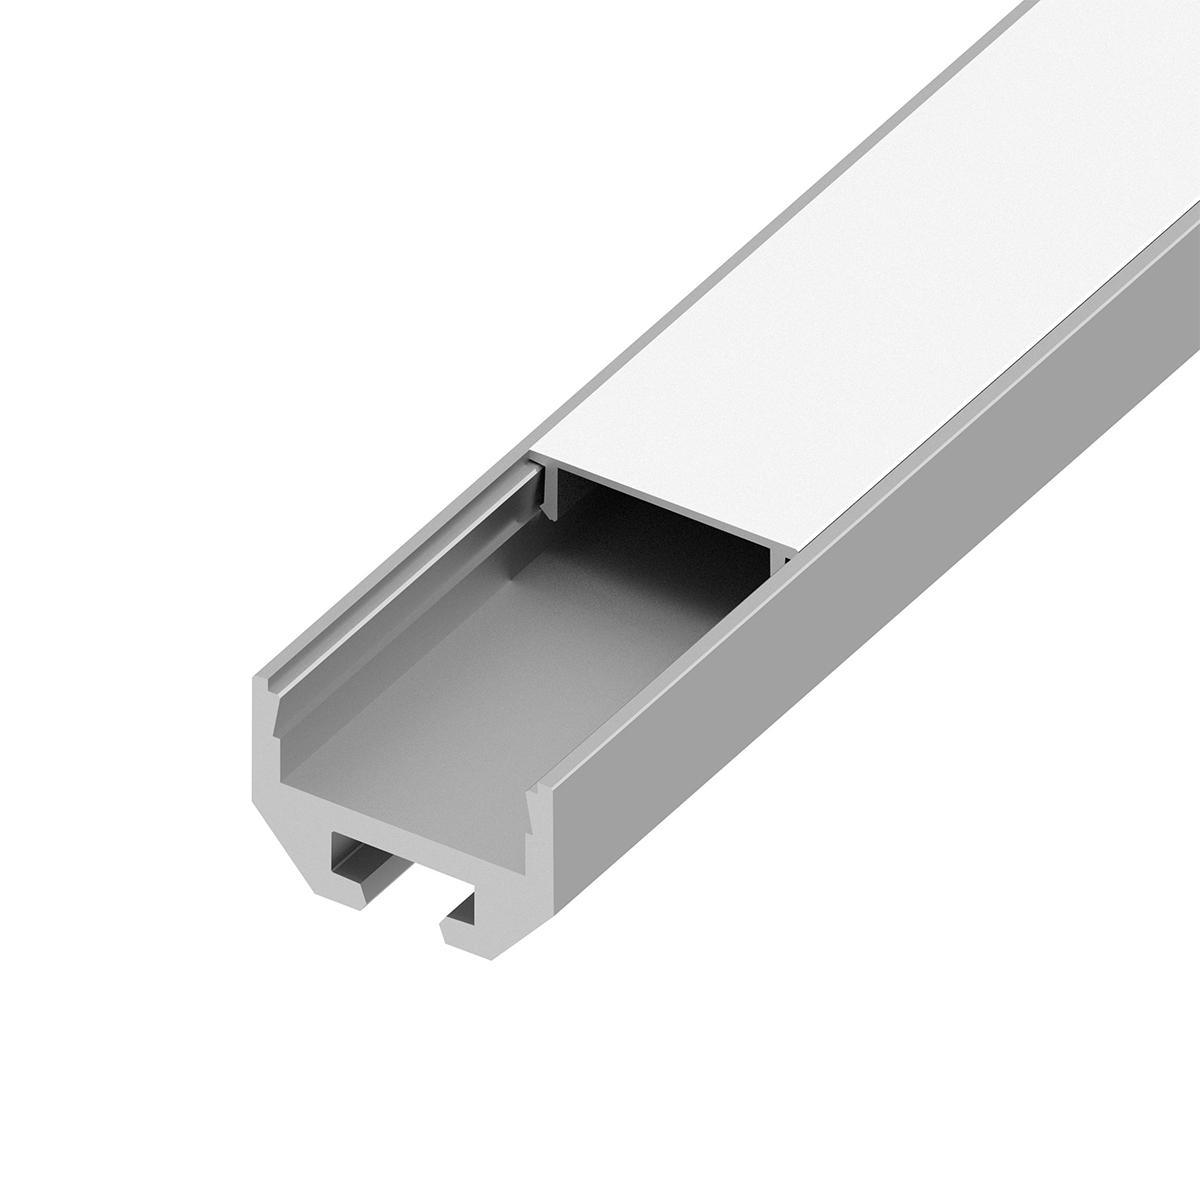 48in. Chromapath Builder, Square White LED Channels for 12mm strip lights - Bees Lighting